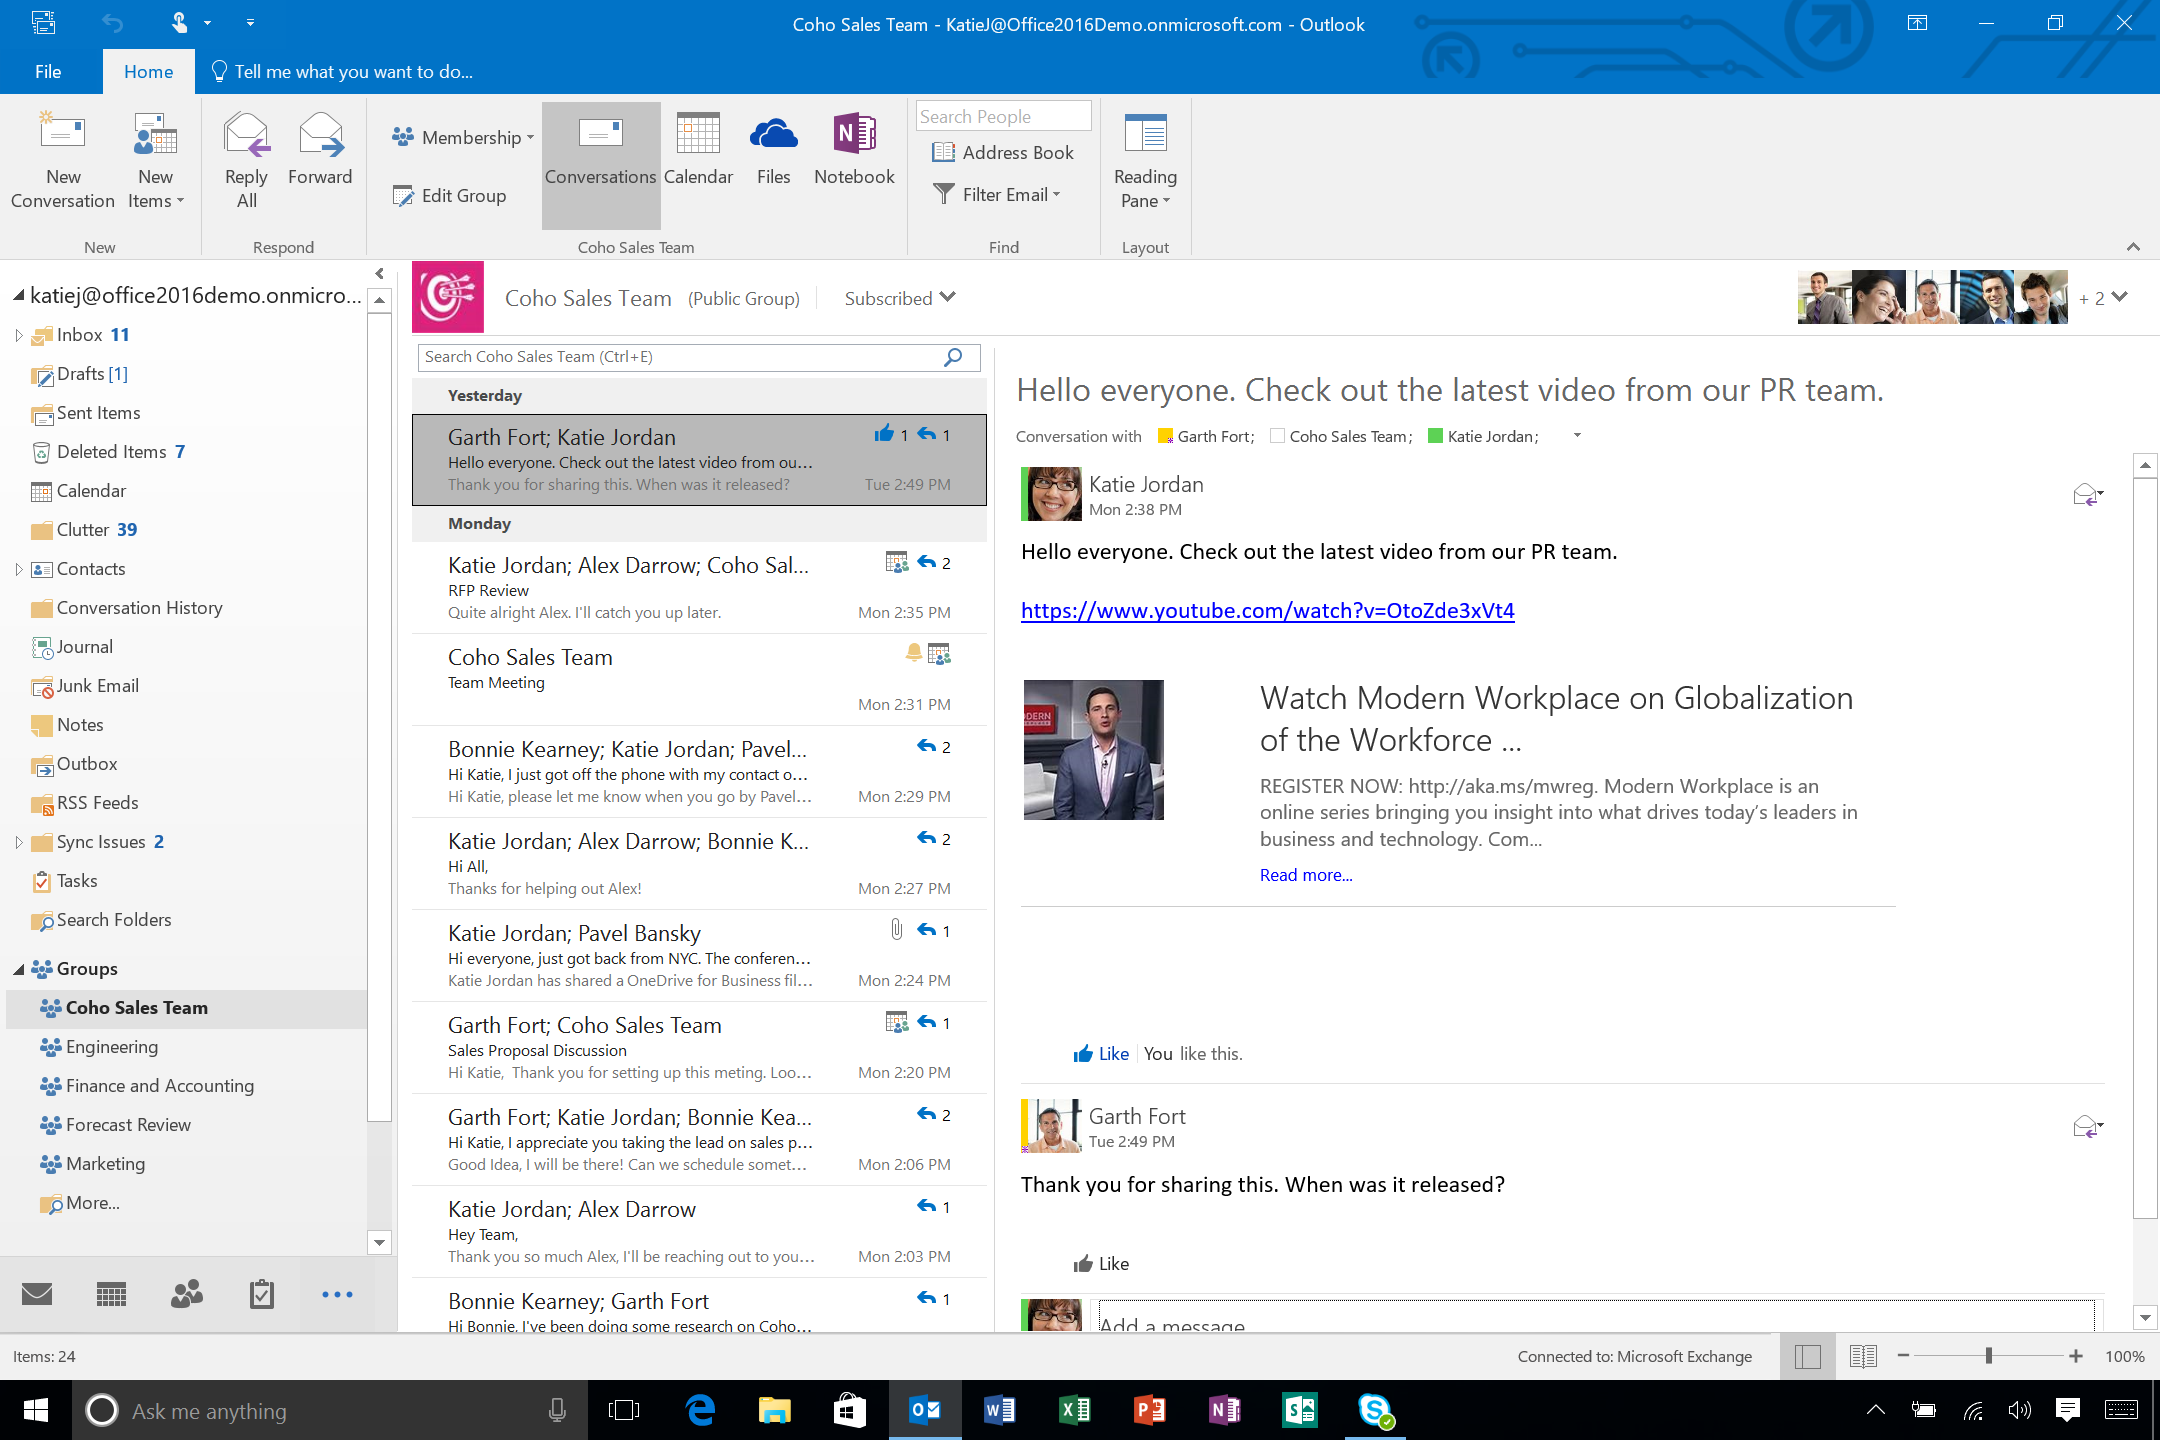 does microsoft home and business 2016 have outlook